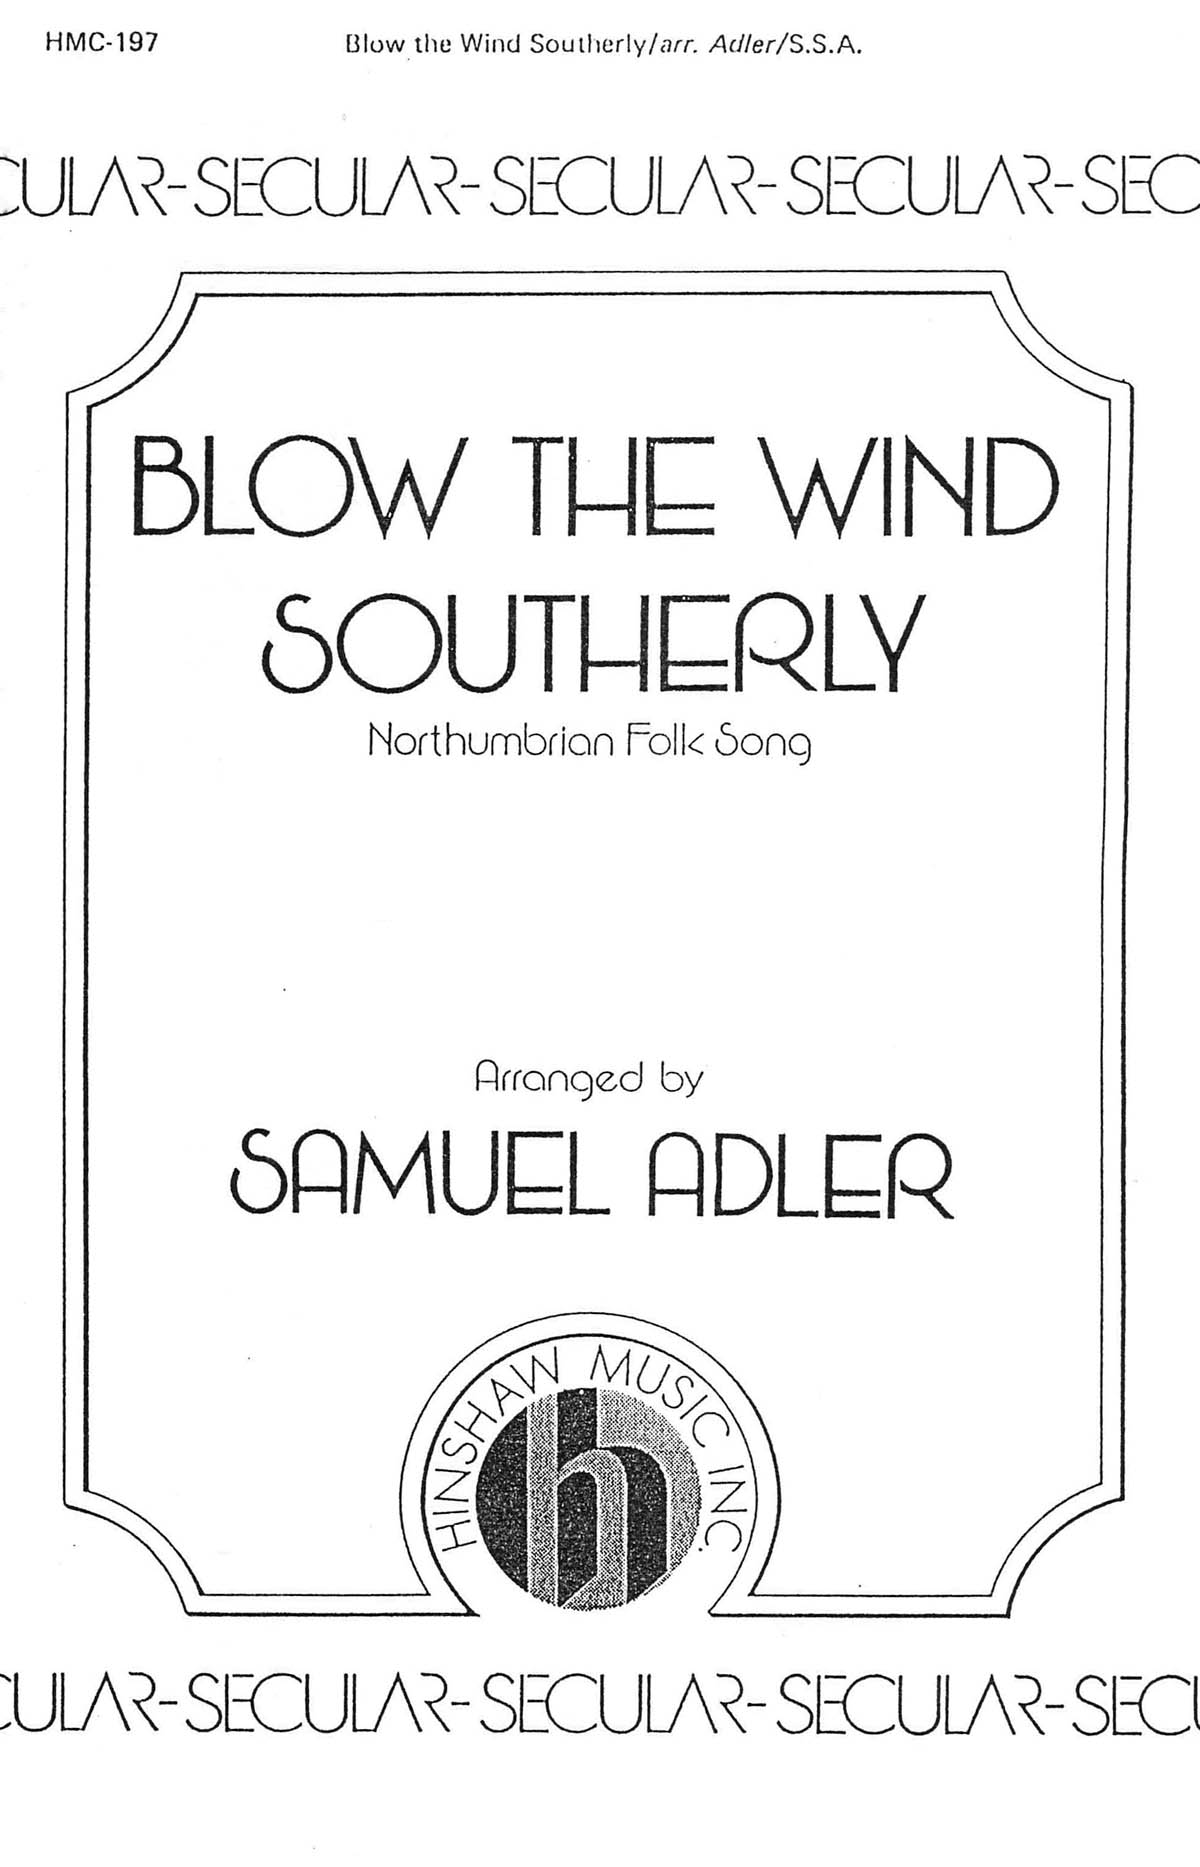 Blow The Wind Southerly